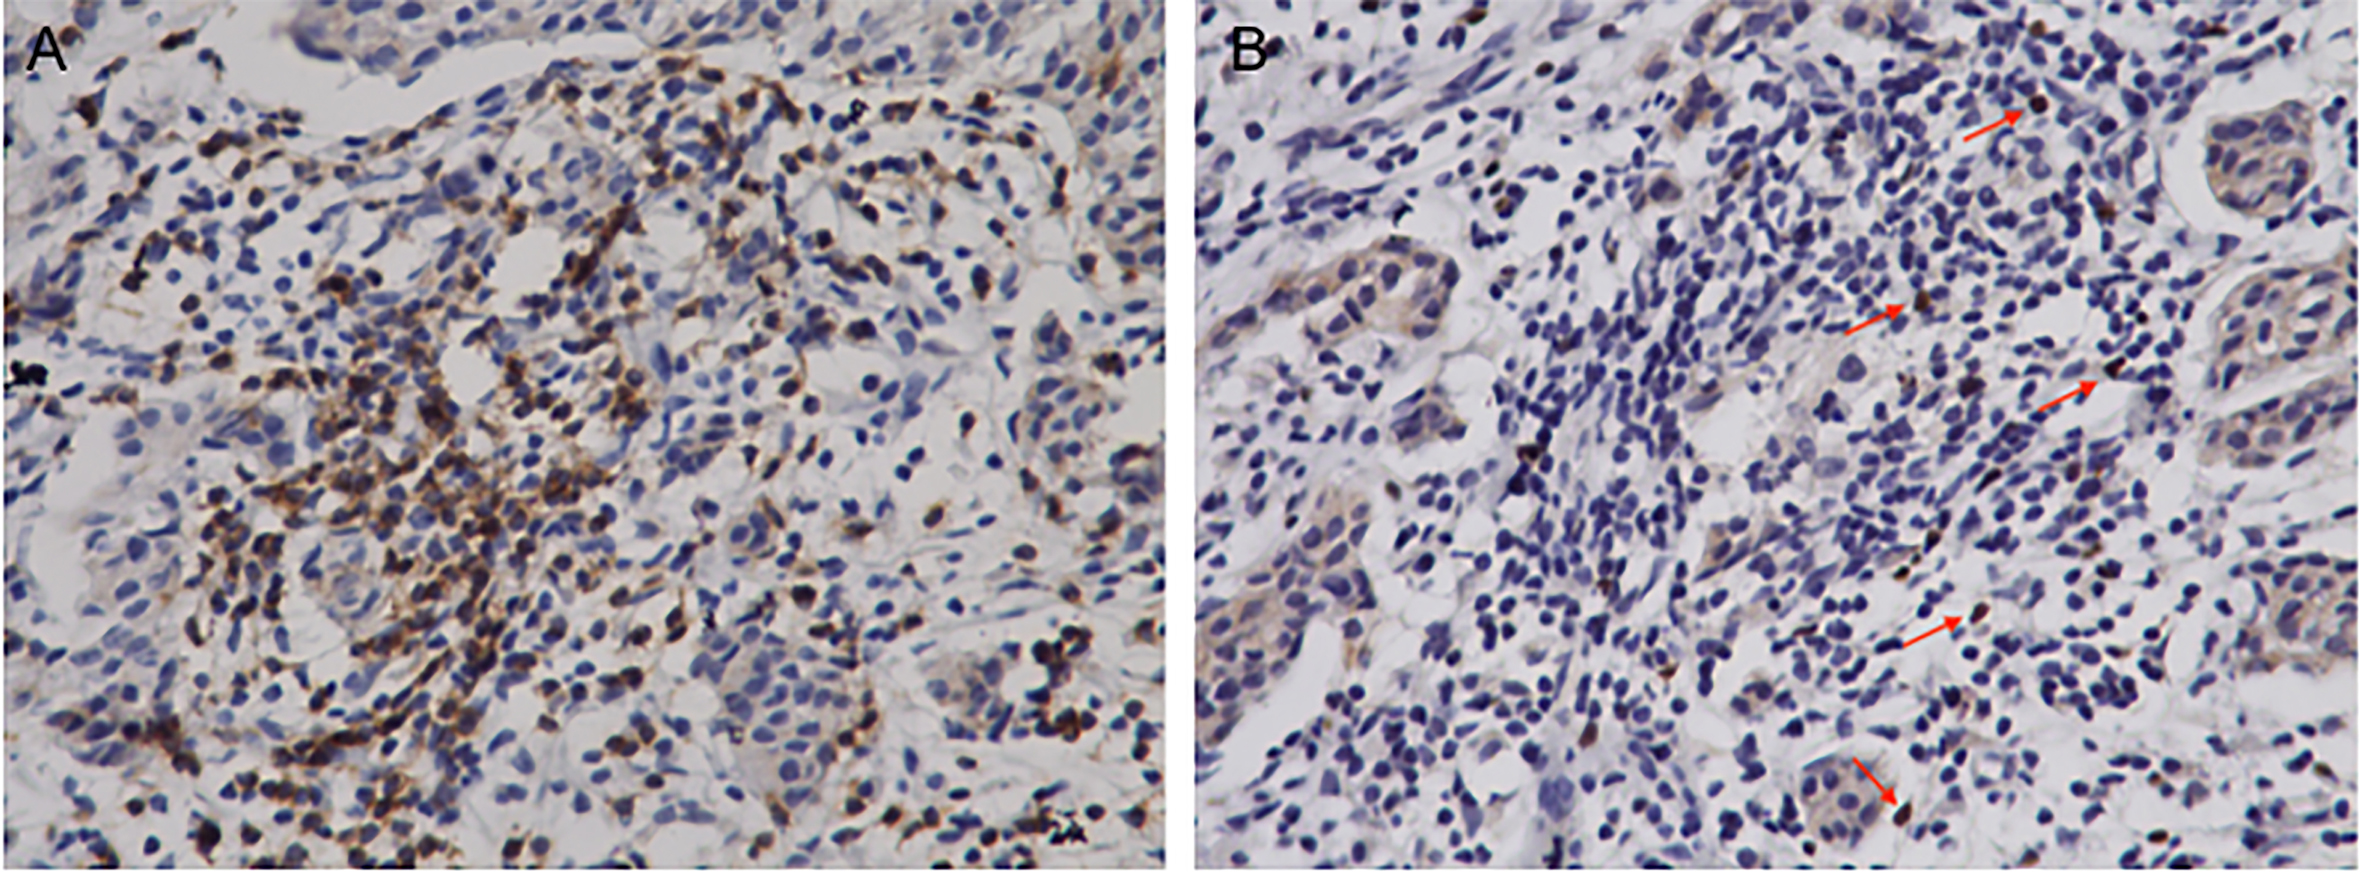 Representative immunohistochemistry staining of stromal CD8+ and FOXP3+ T cell infiltrates in breast cancer (magnification, x400). Consecutive sections were used for immunohistochemical detection of FOXP3+ (A) and CD8+ cells (B).